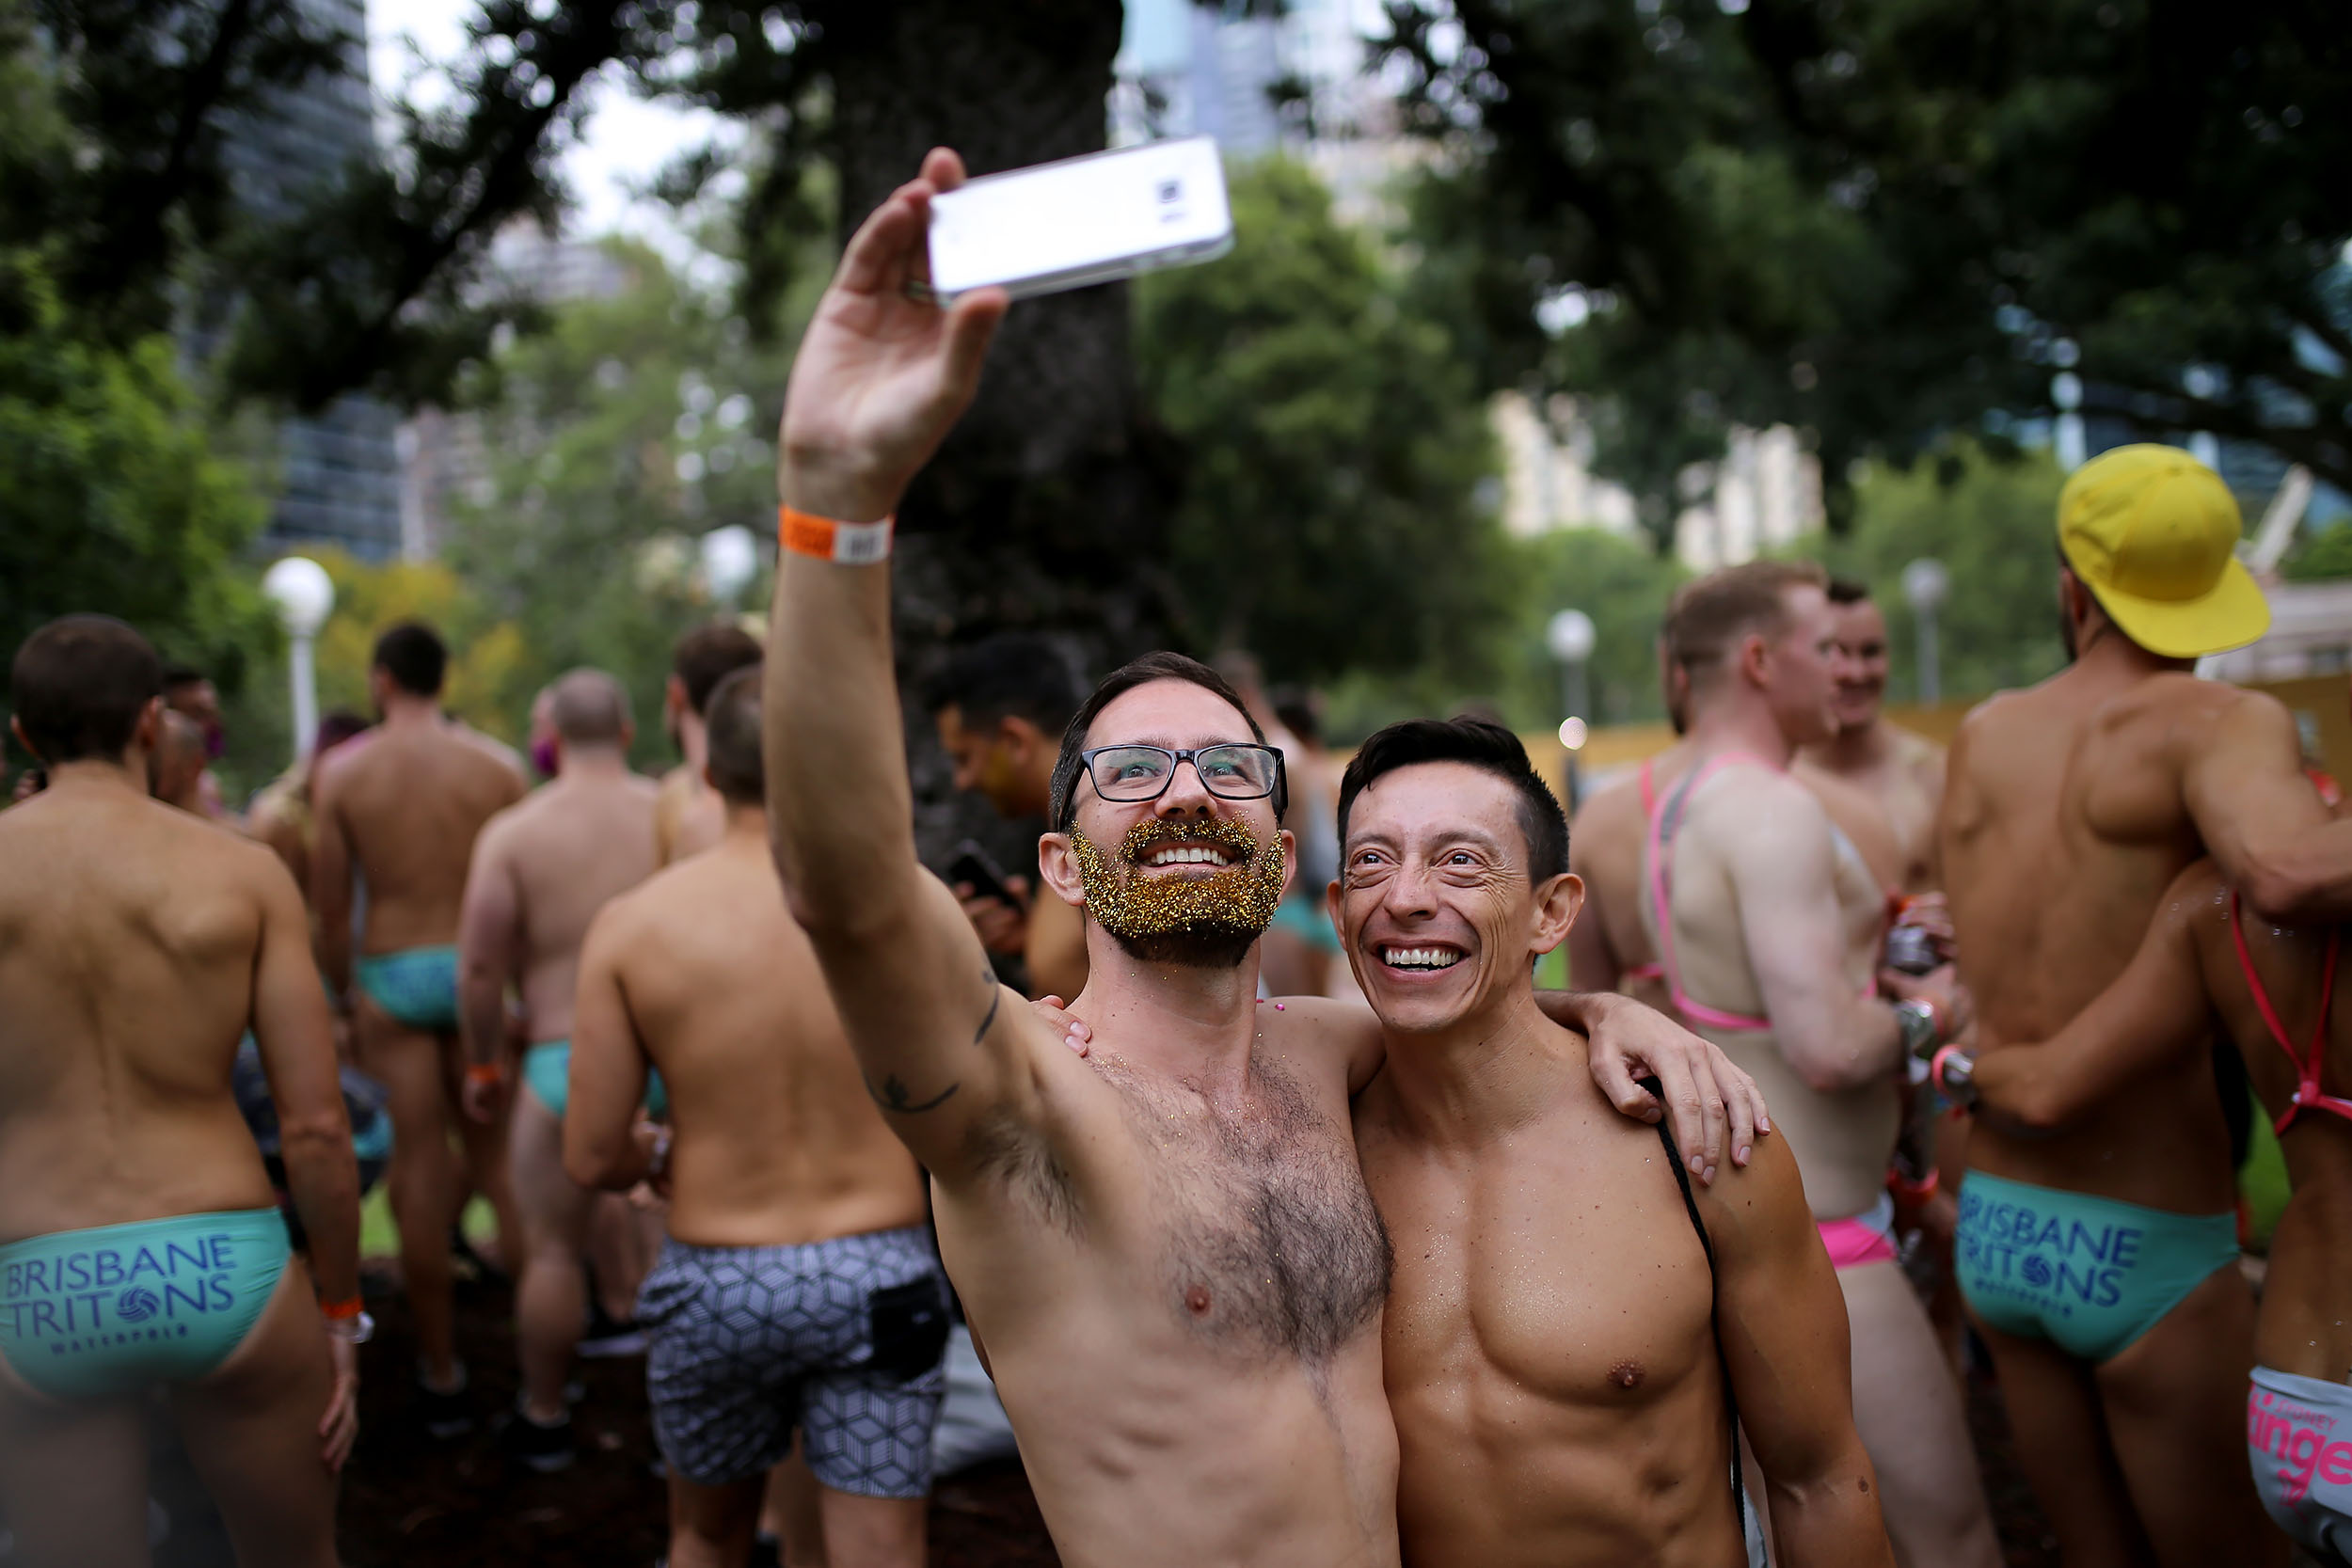  Participants take a selfie during the annual Sydney Gay and Lesbian Mardi Gras festival in Sydney, Australia. 